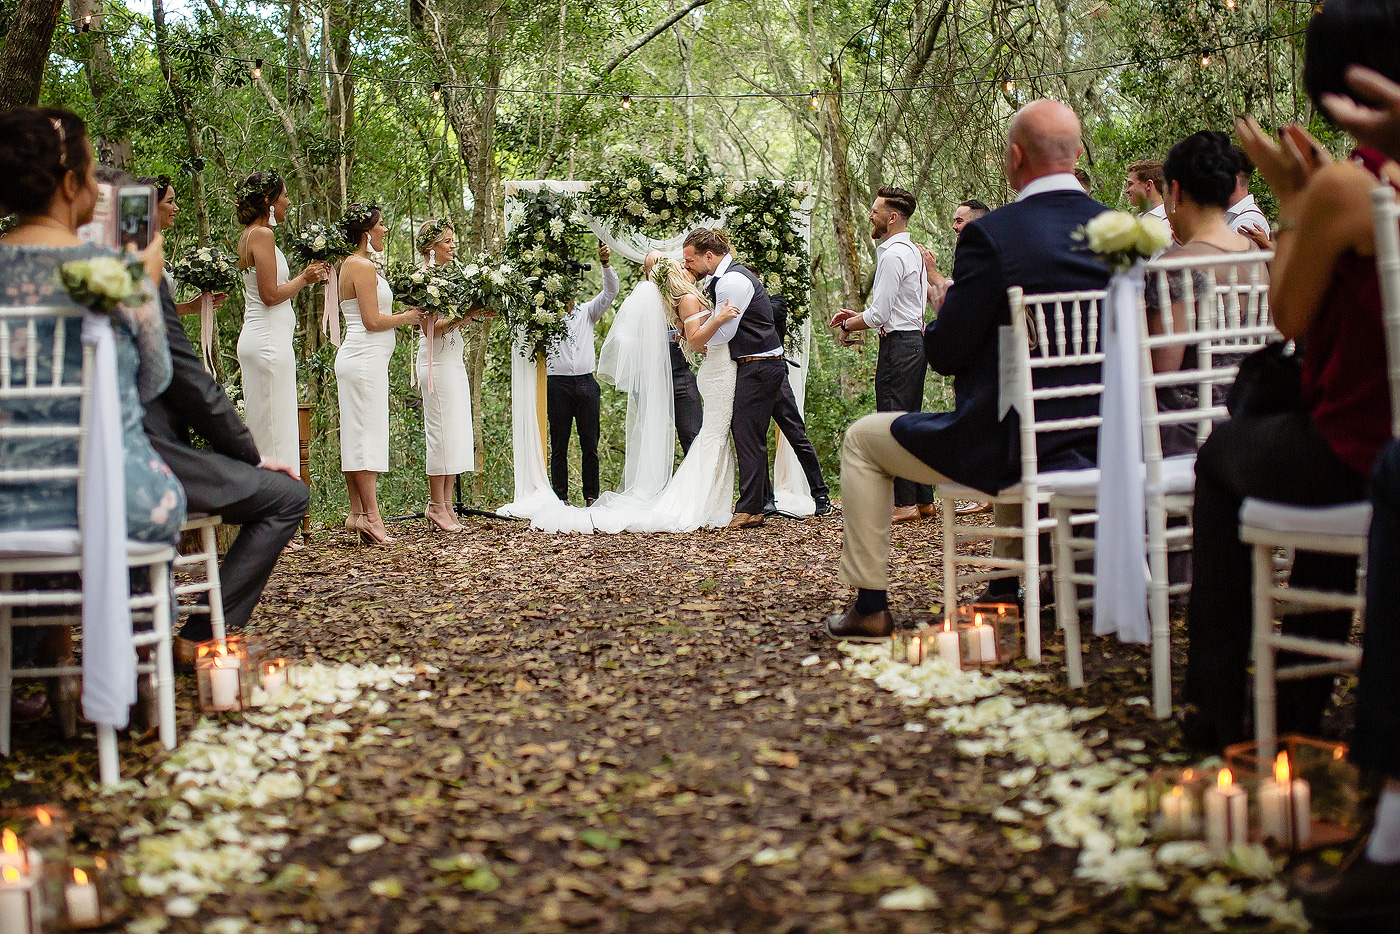 Bride and groom kiss at the altar in a forest wedding venue